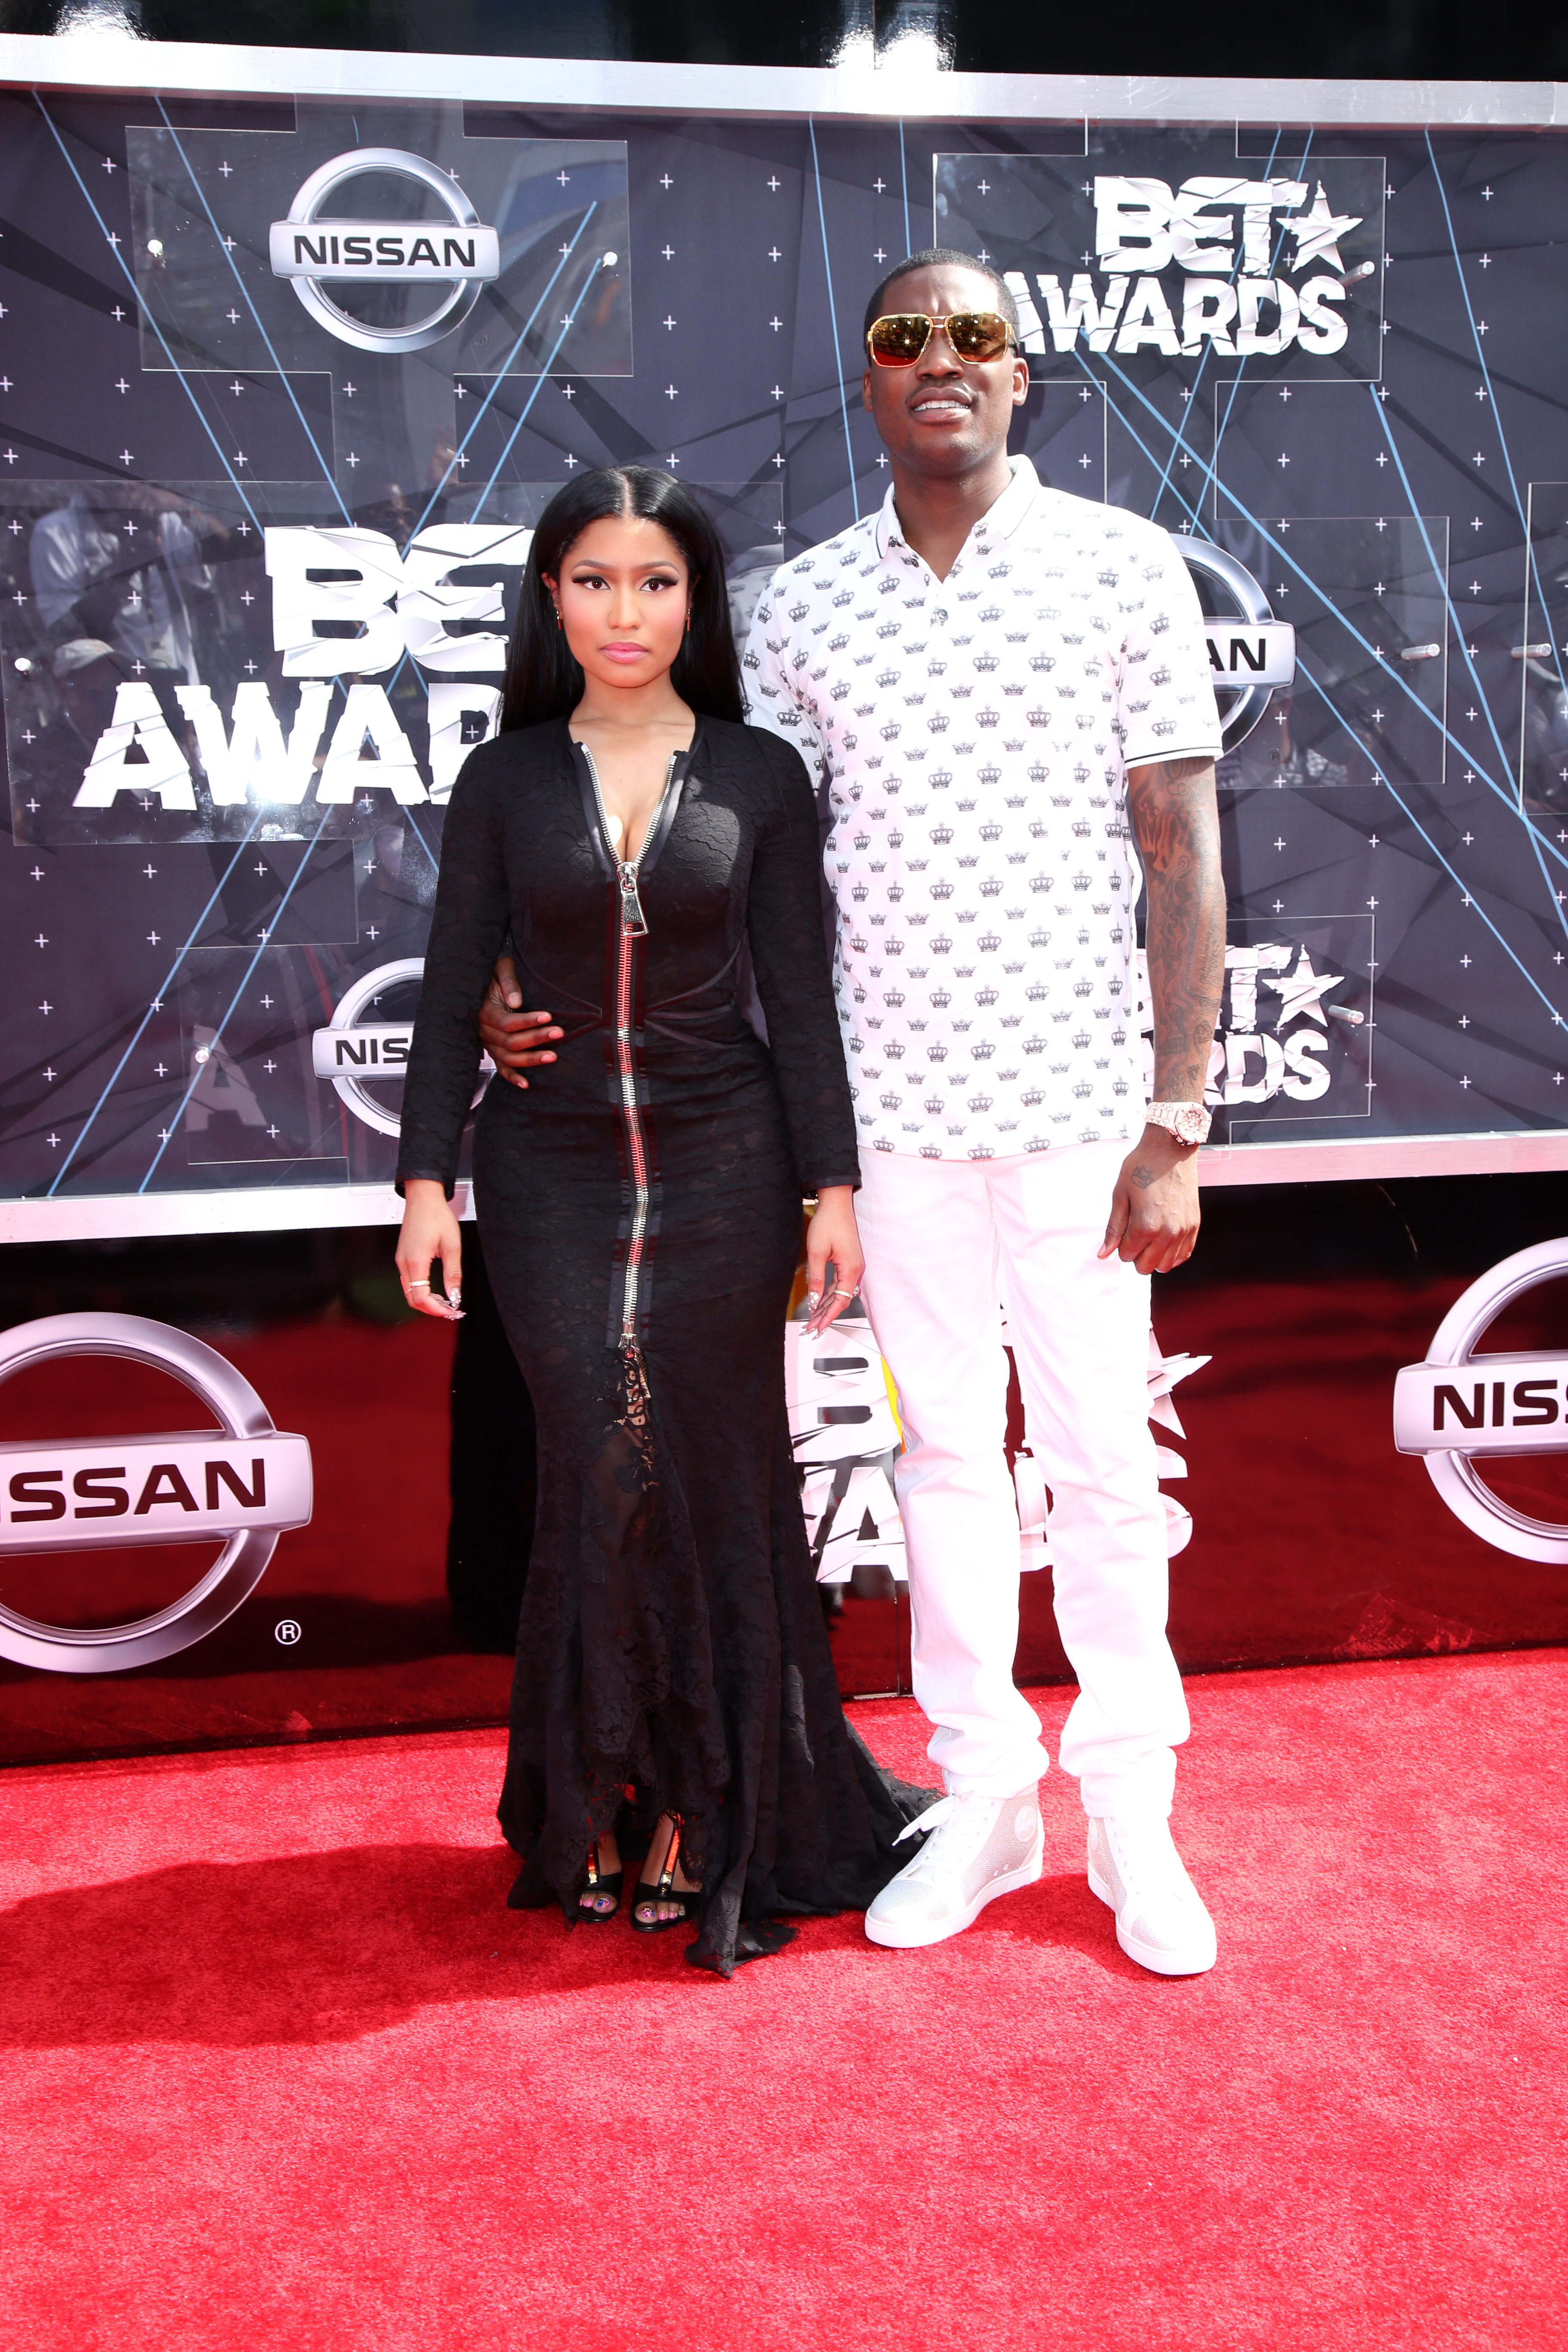 A throwback photo of Nicki Minaj and Meek Mill at a red-carpet event and they look awesome in black and white respectively.